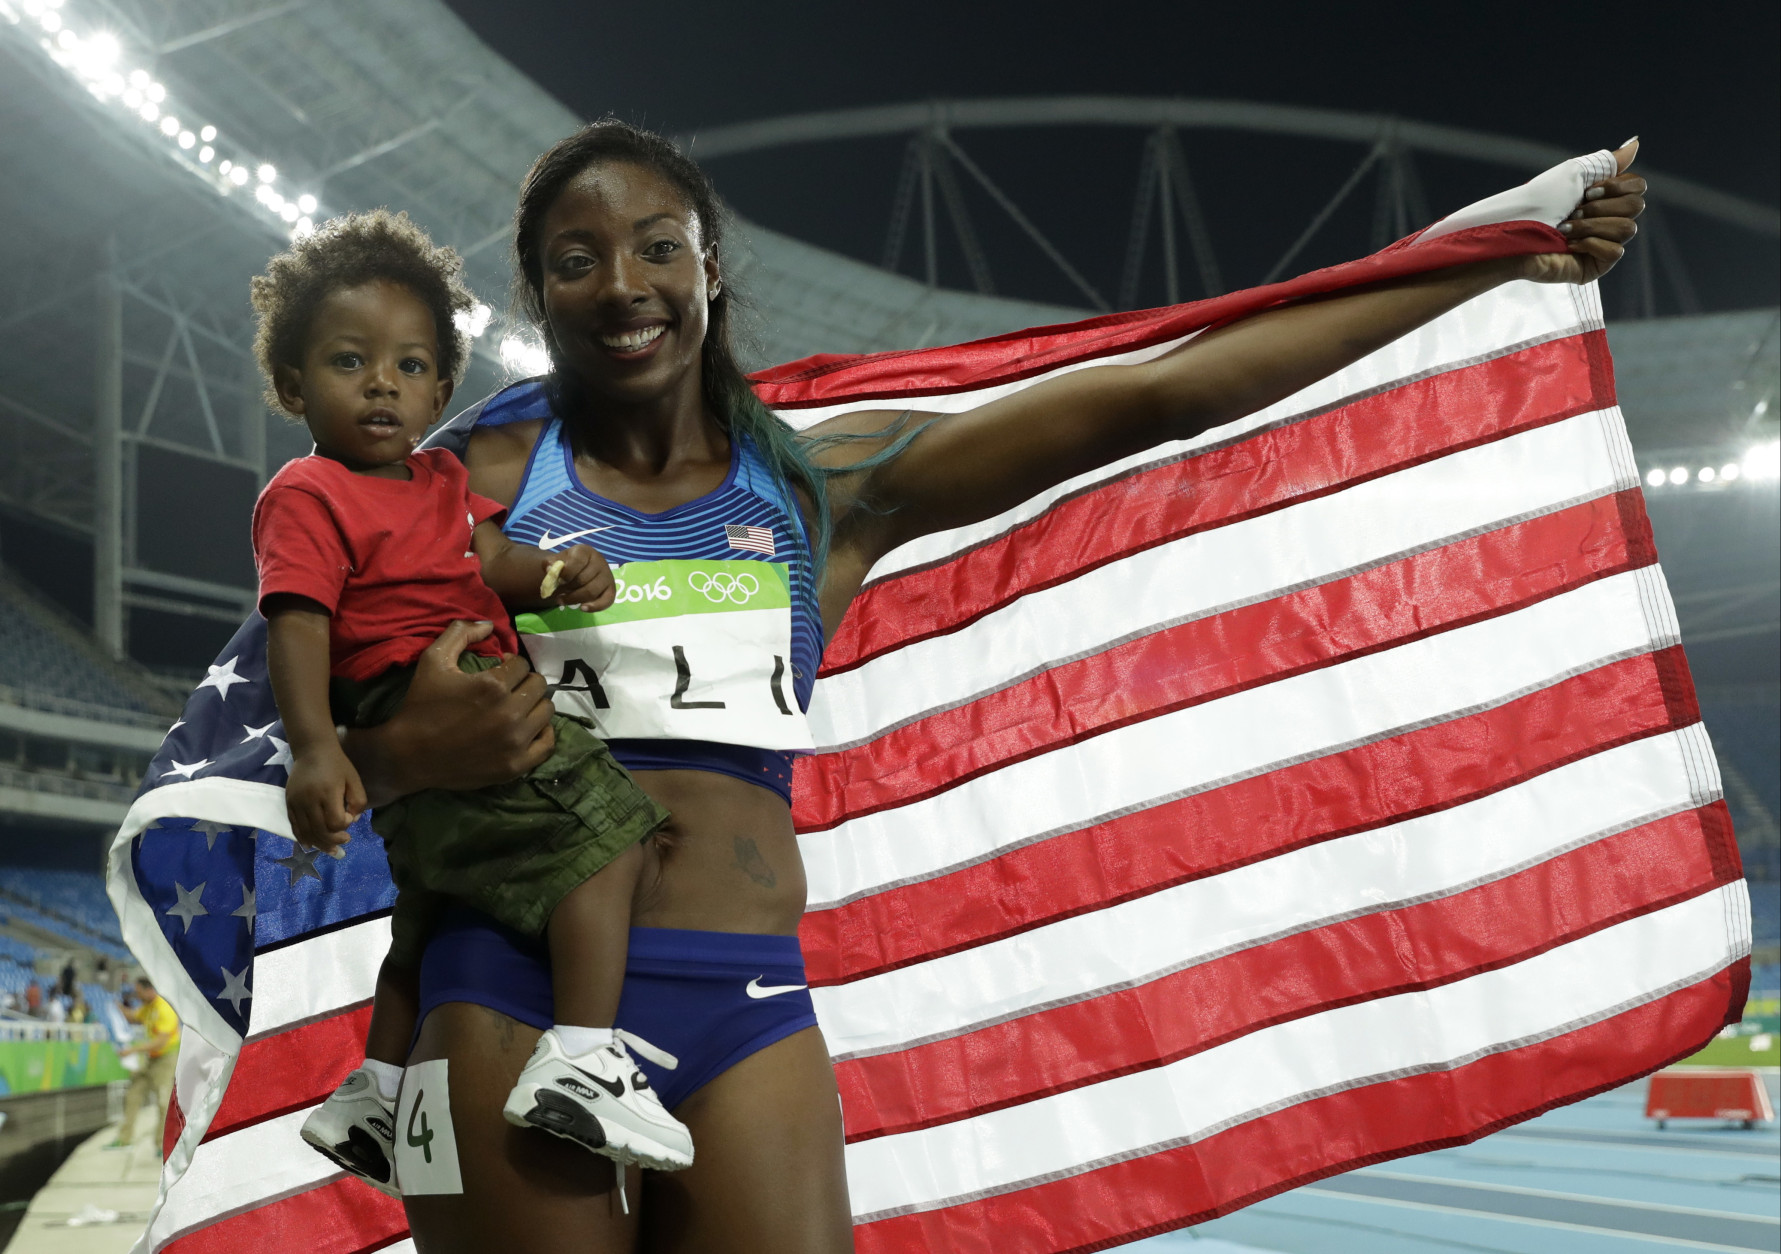 United States' silver medal winner Nia Ali poses with her 15-months old son Titus after the women's 100-meter hurdles final, during the athletics competitions of the 2016 Summer Olympics at the Olympic stadium in Rio de Janeiro, Brazil, Wednesday, Aug. 17, 2016. (AP Photo/Matt Dunham)